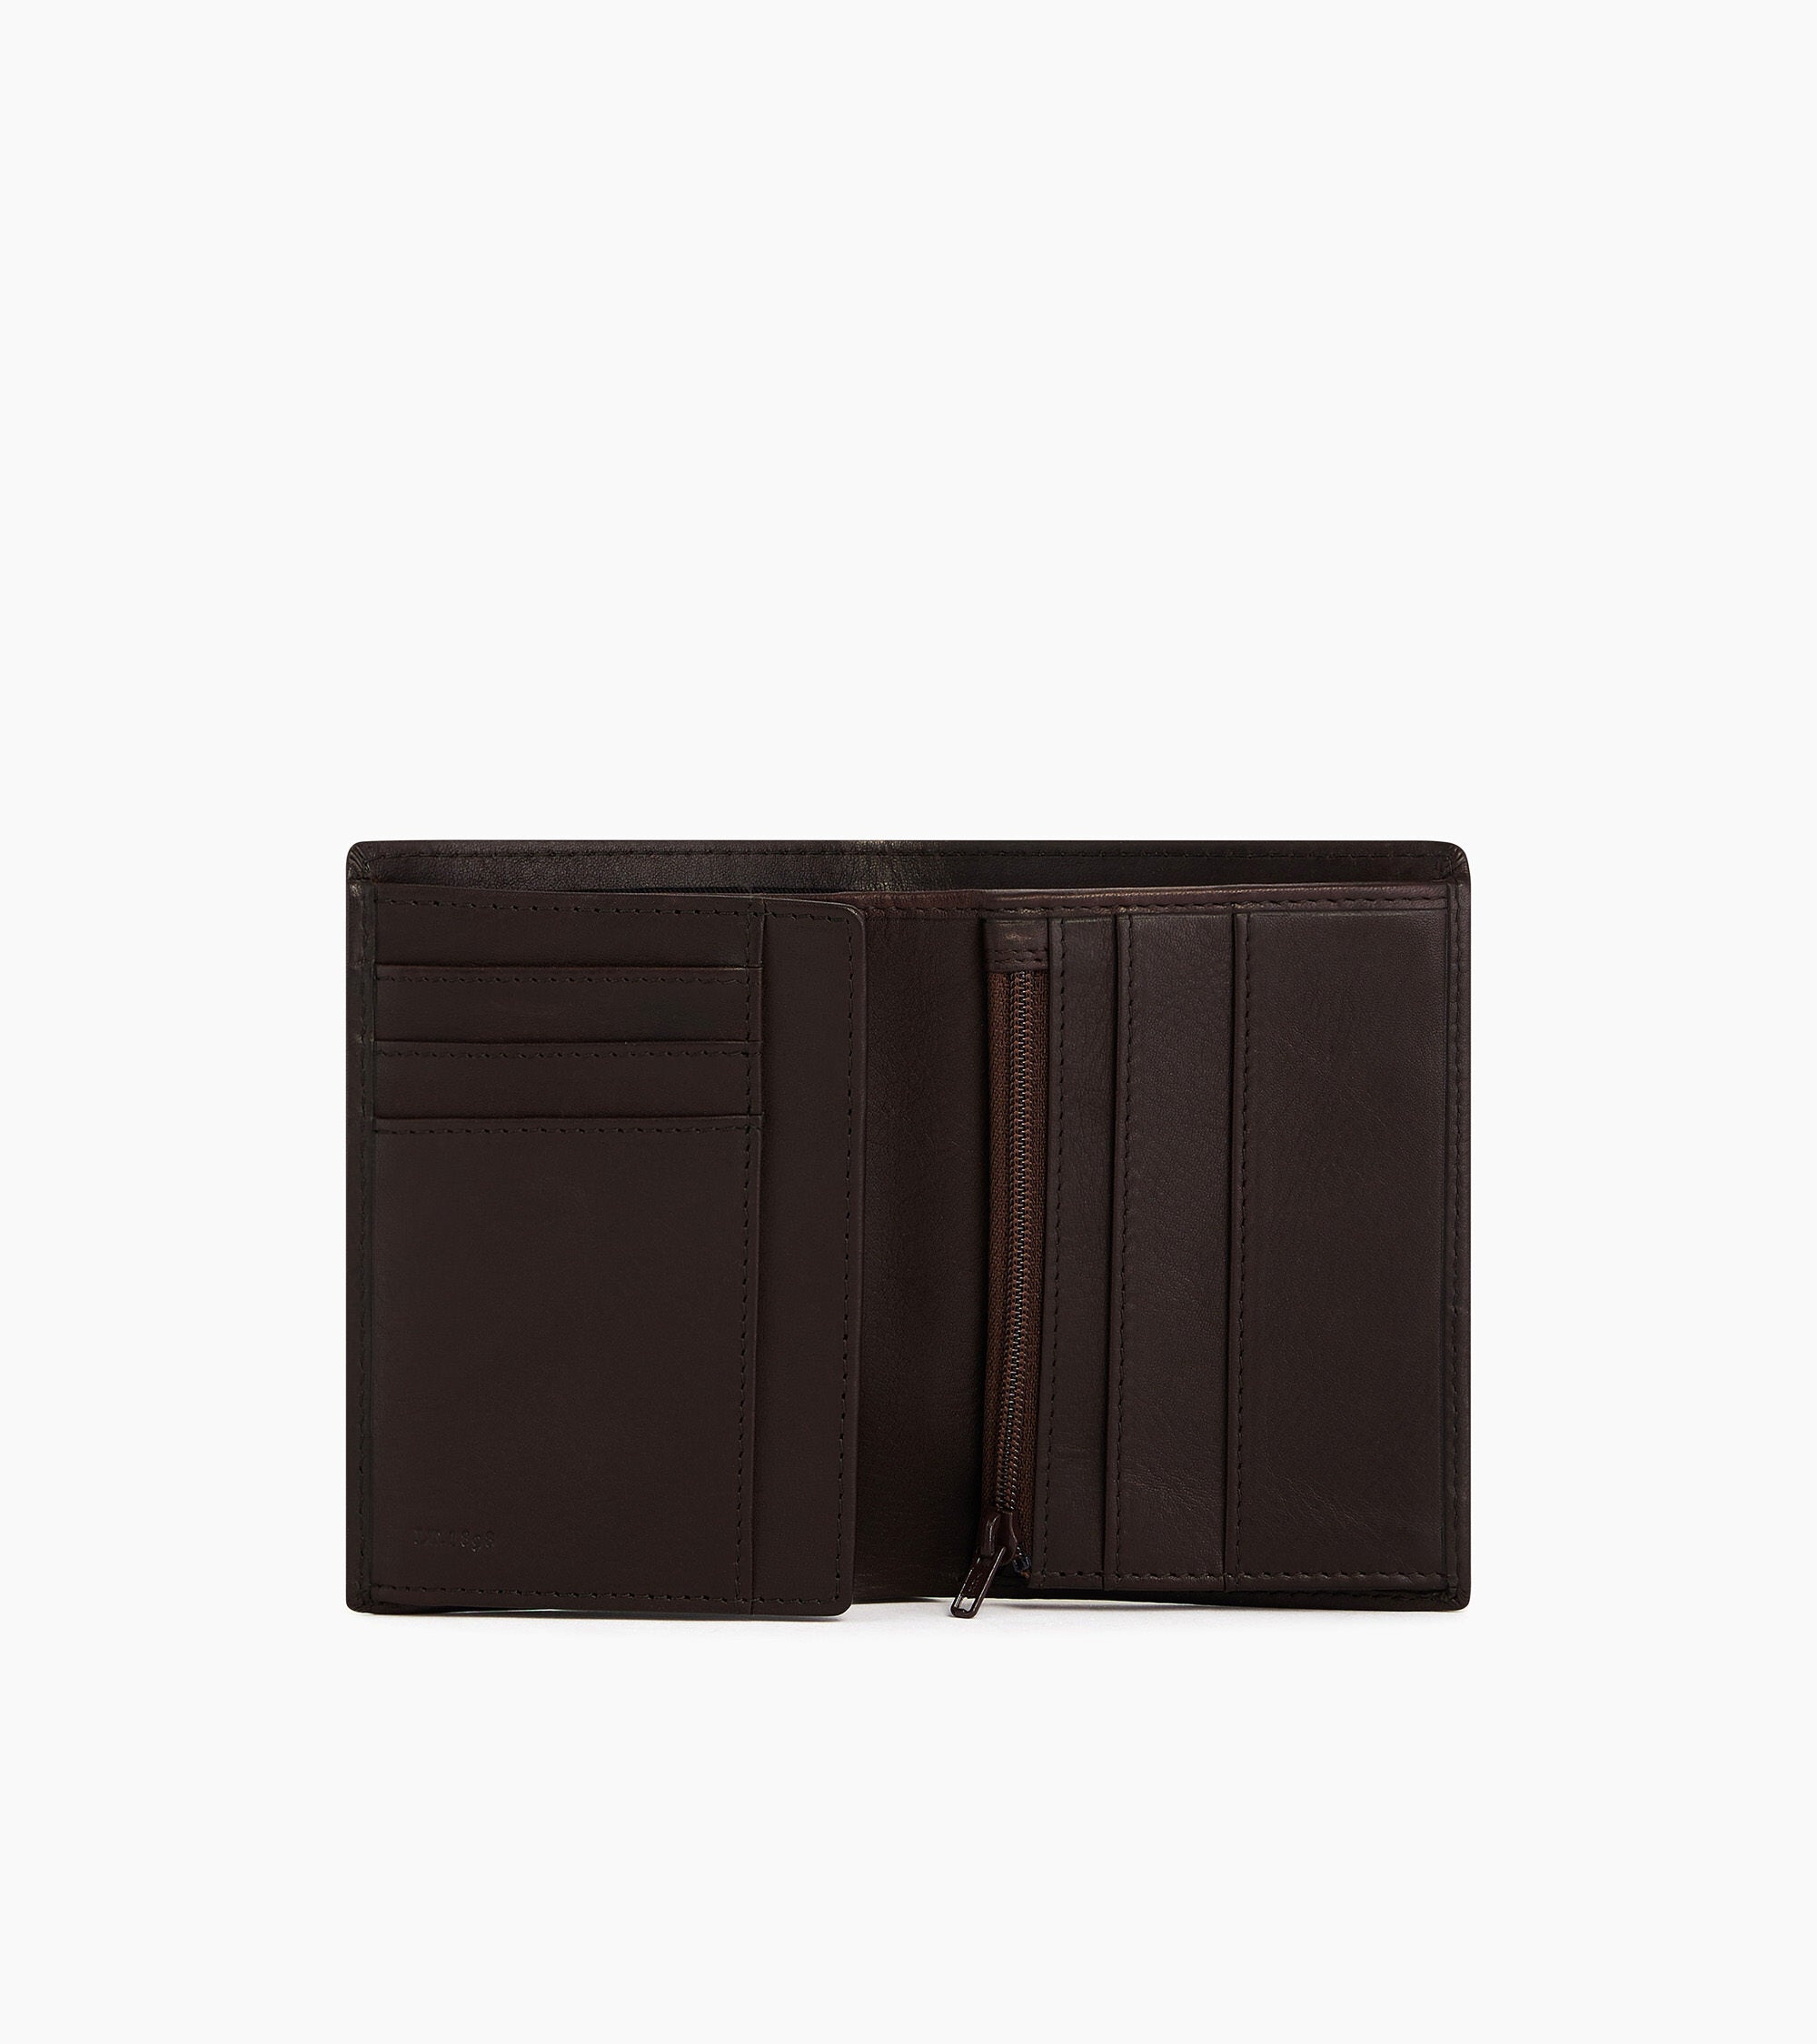 Zipped Gary oiled leather wallet 2 shutters